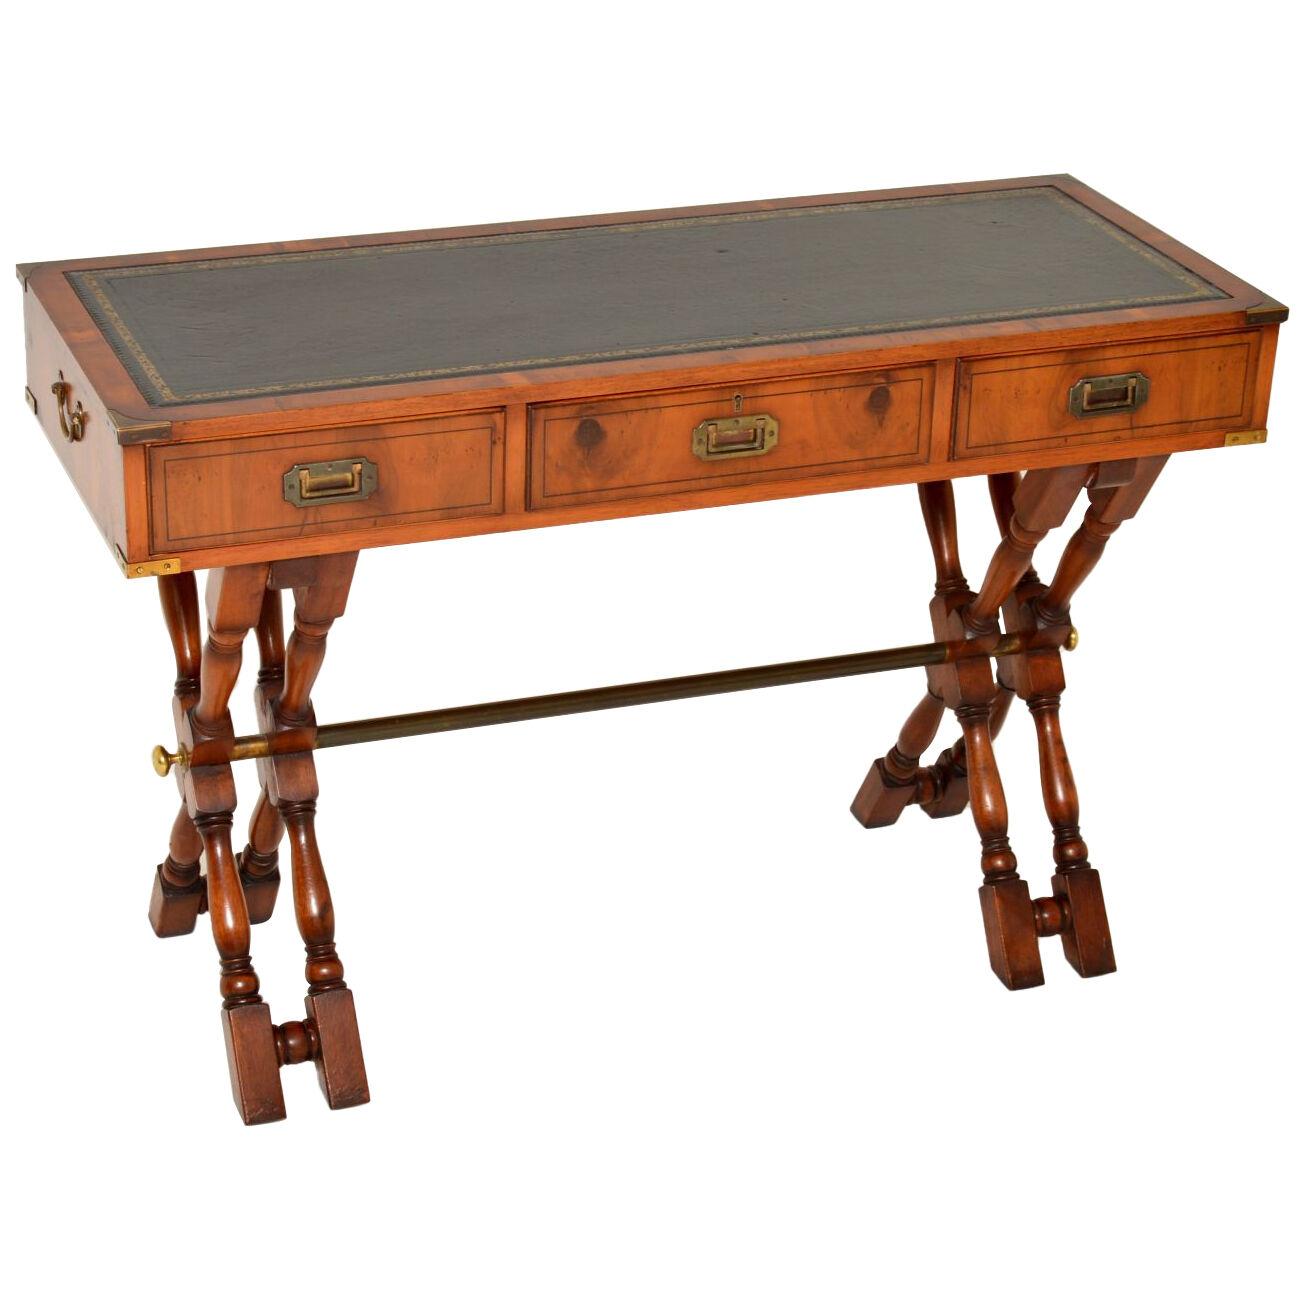 Antique Yew Wood Military Campaign Style Desk